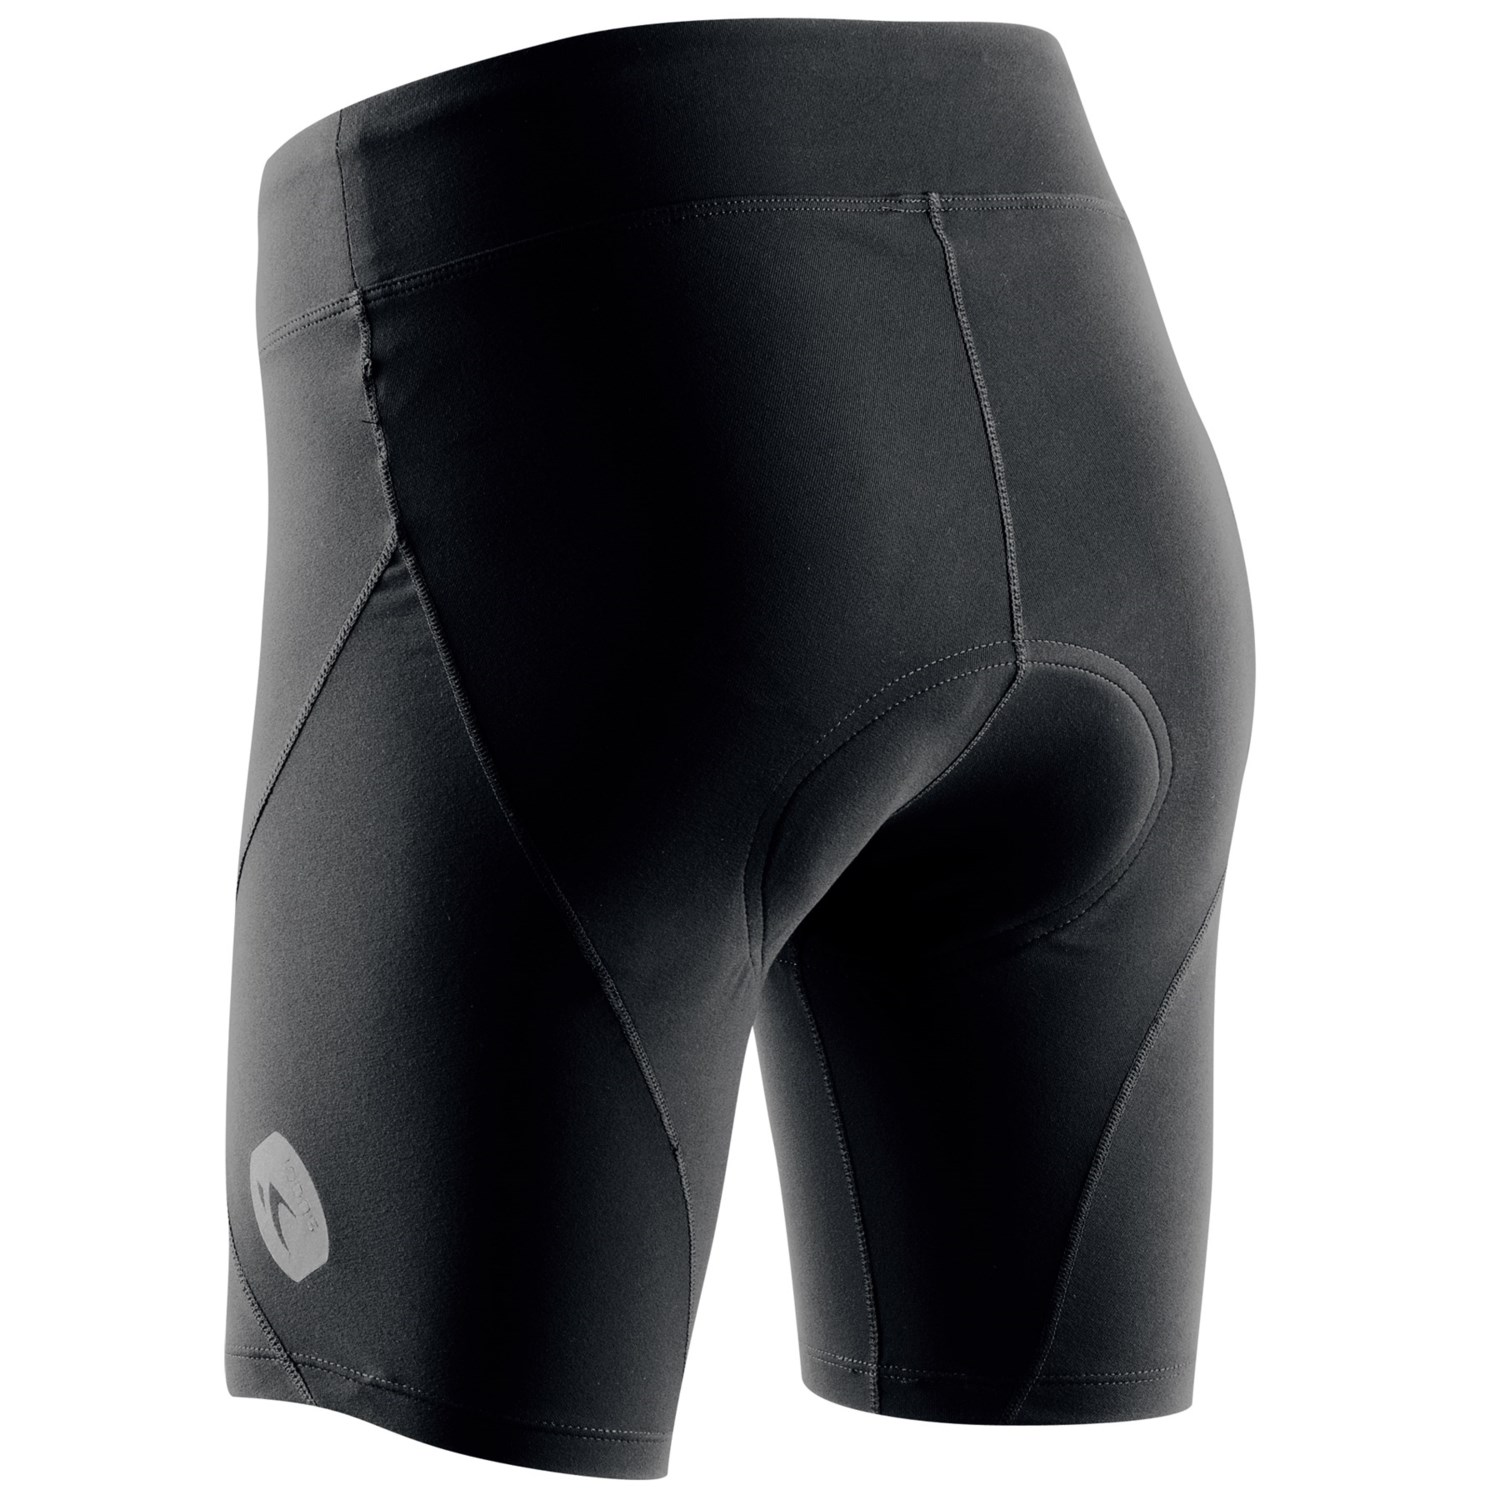 Sugoi Lucky Cycling Shorts (For Women) 7291K - Save 32%